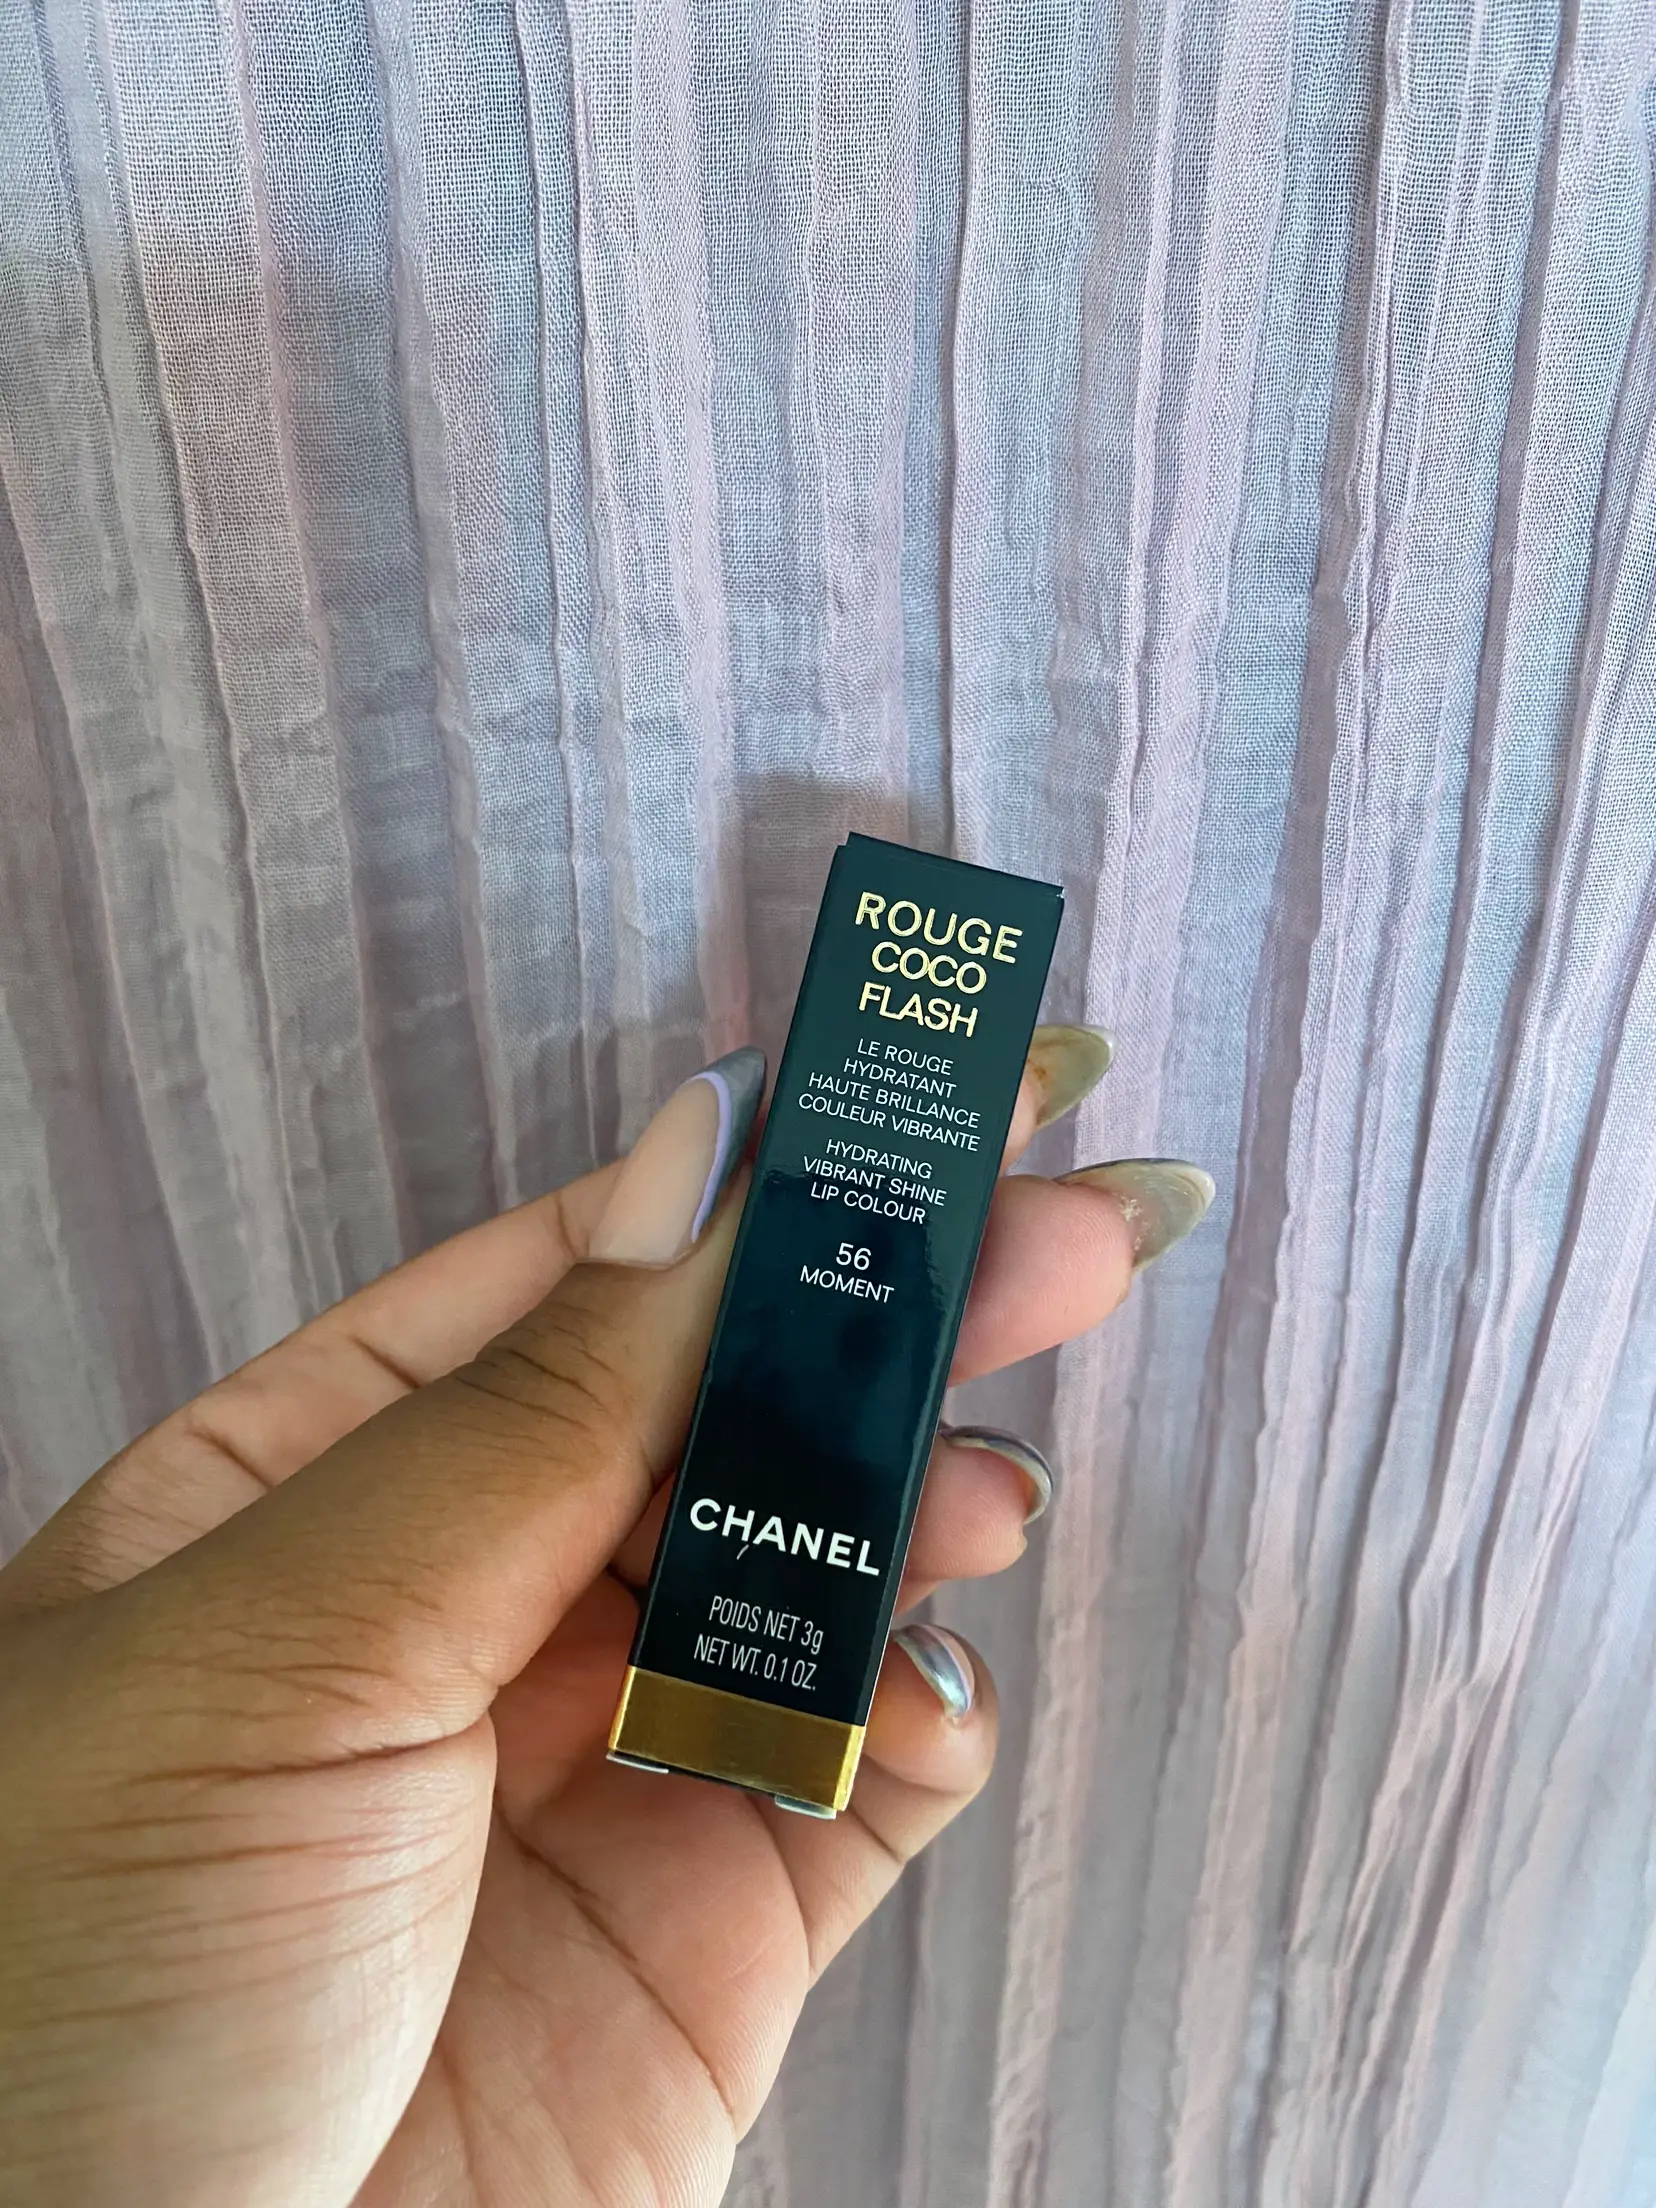 Chanel Coco Rogue Flash in “Moment”